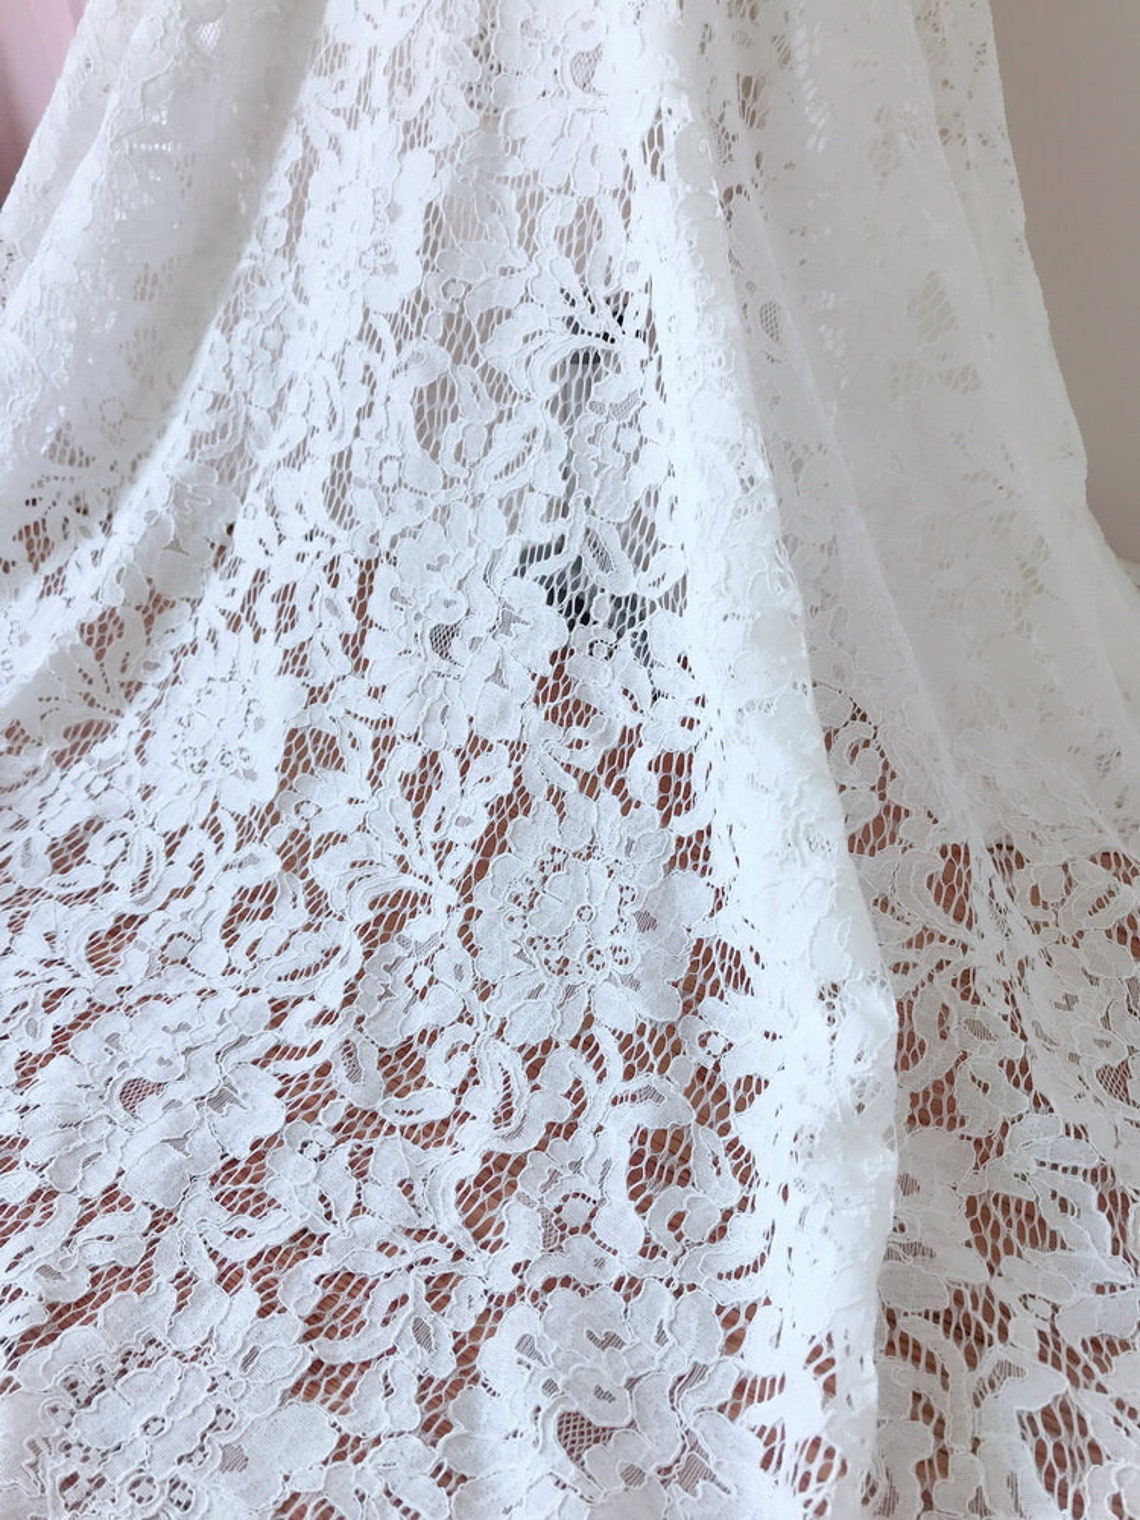 Retro Chic French Lace Soft Floral Chantilly Lace Fabric for | Etsy